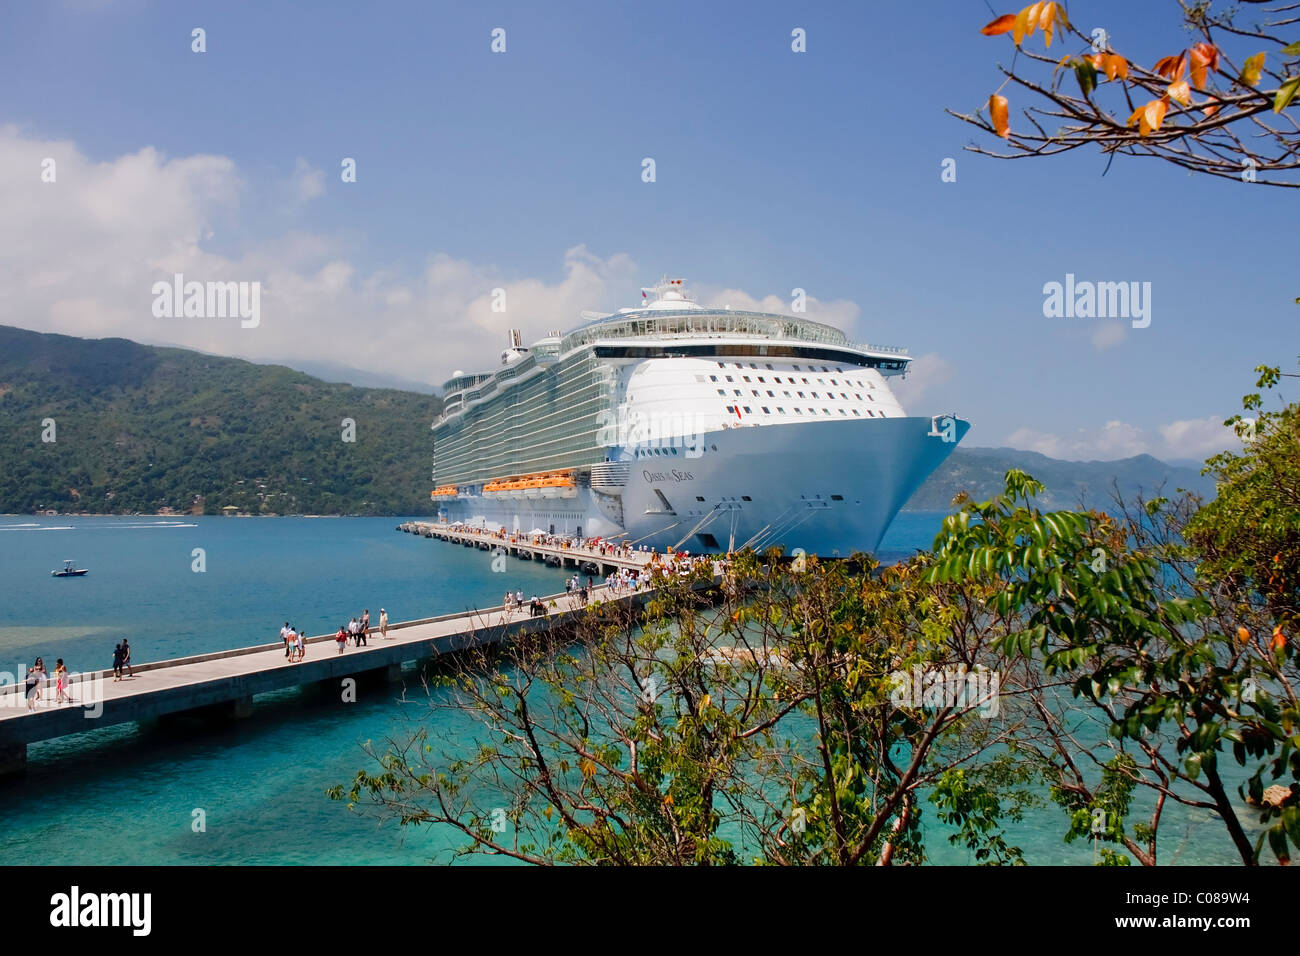 A huge luxury cruise ship at a tropical port Stock Photo